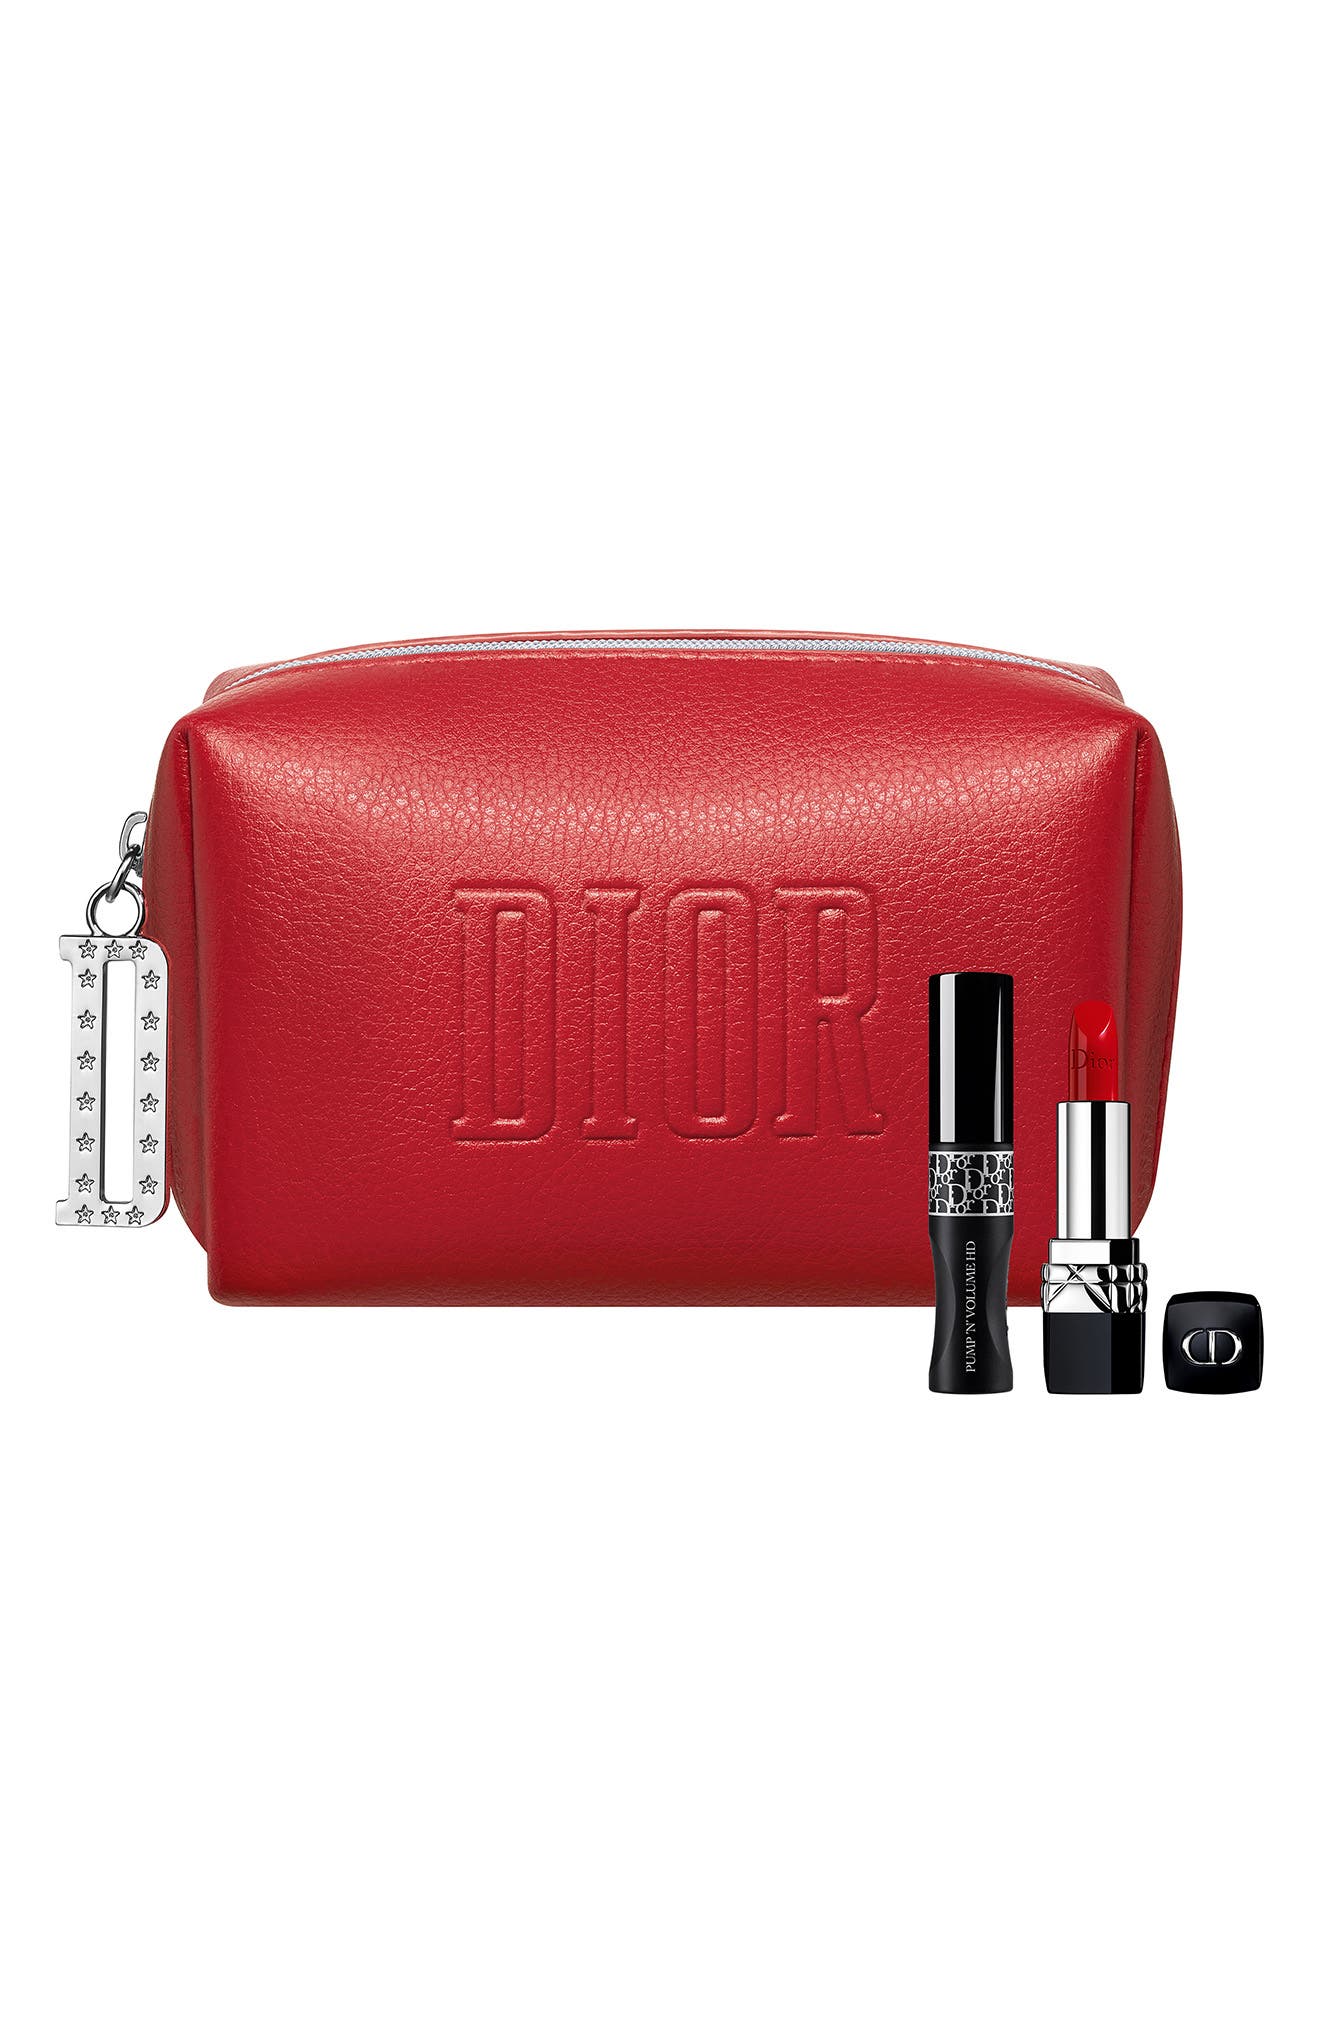 christian dior gift with purchase